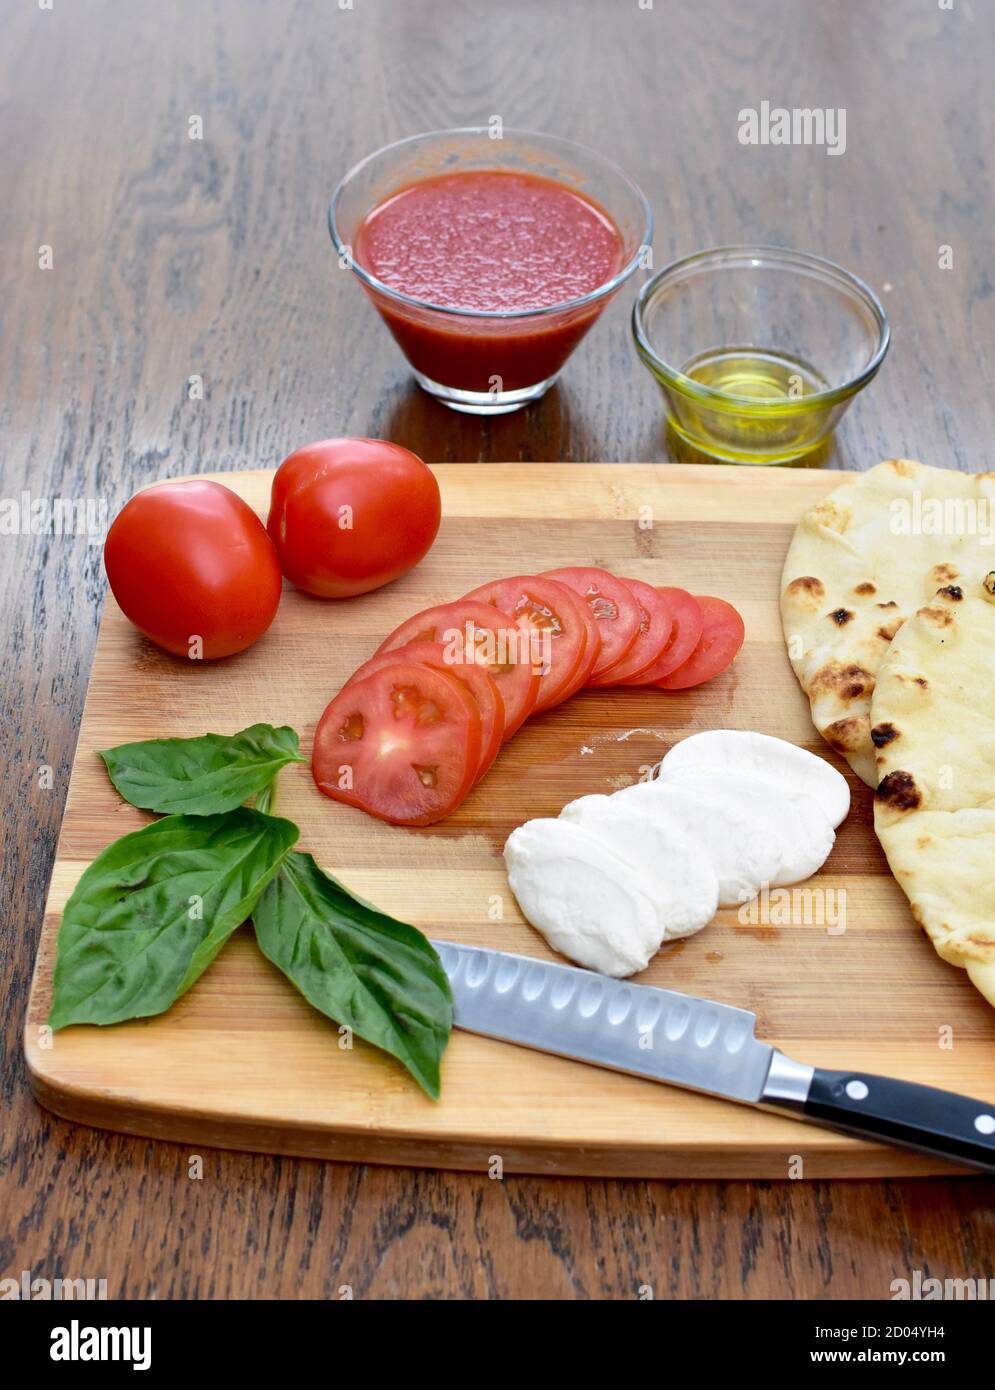 Fresh organic wholesome simple meal kit ingredients ready to prepare delicious Italian meals to share with friends and family Stock Photo